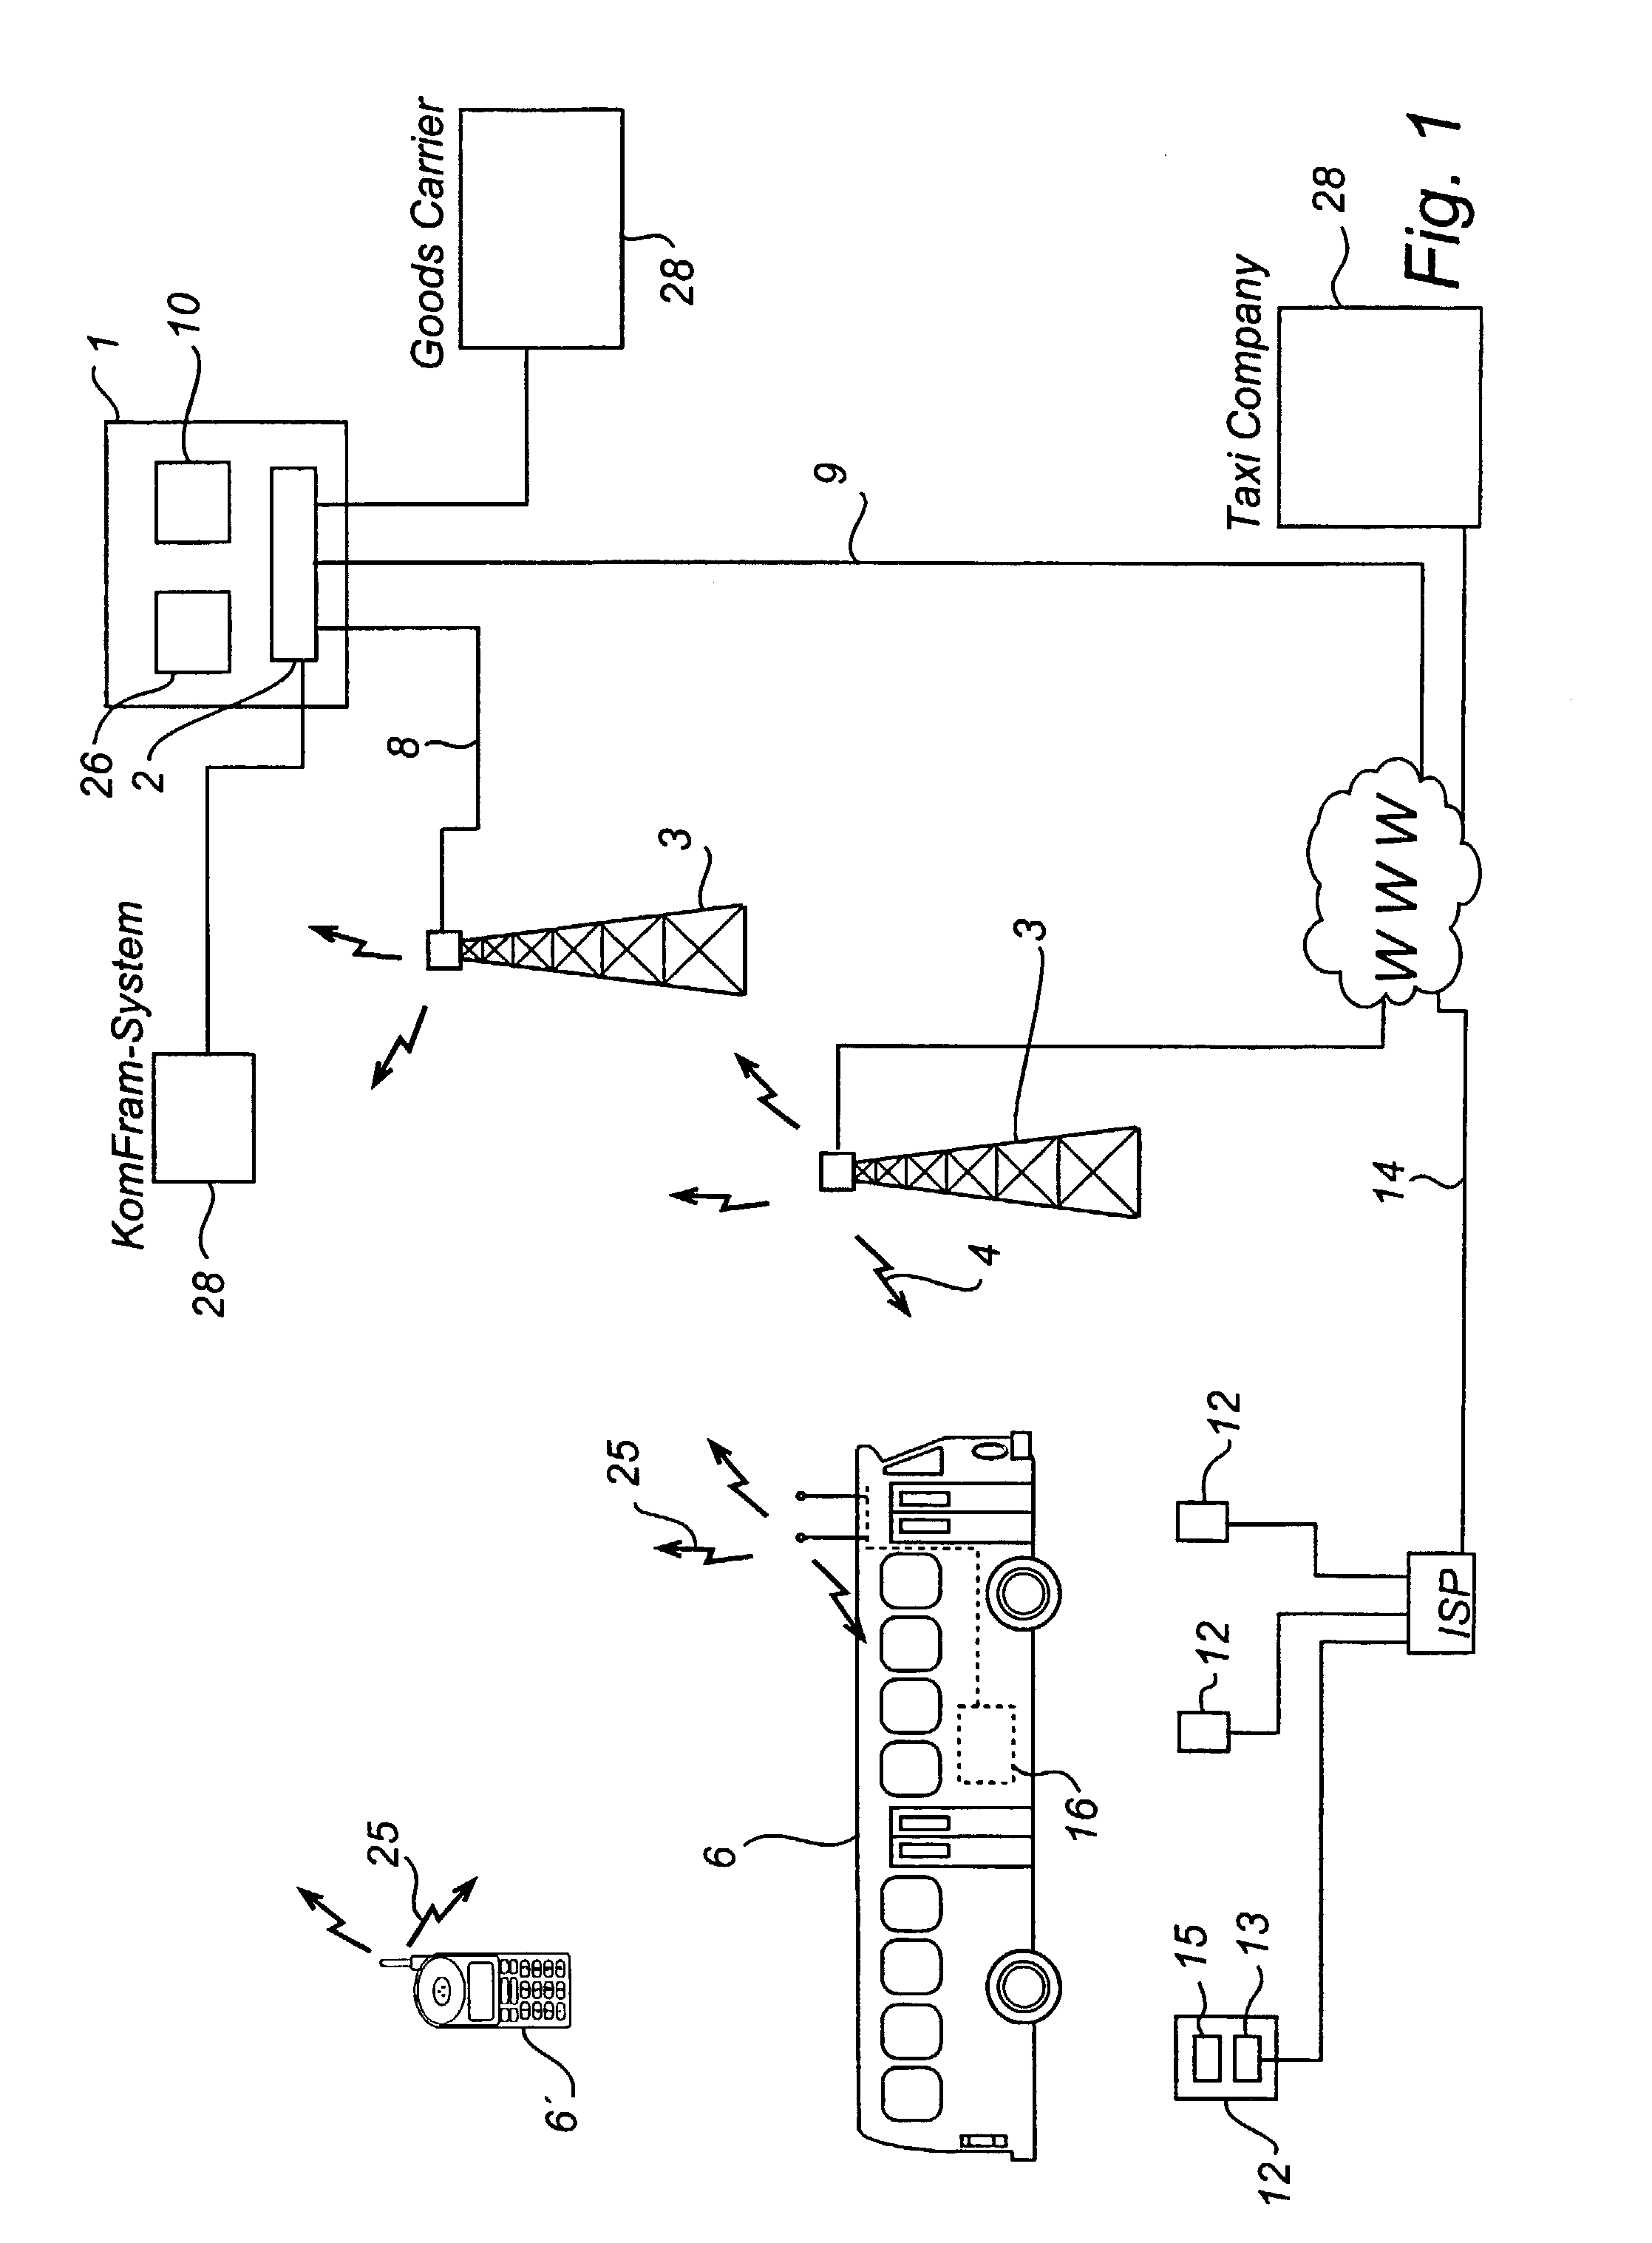 Method and system for radio communication with mobile units